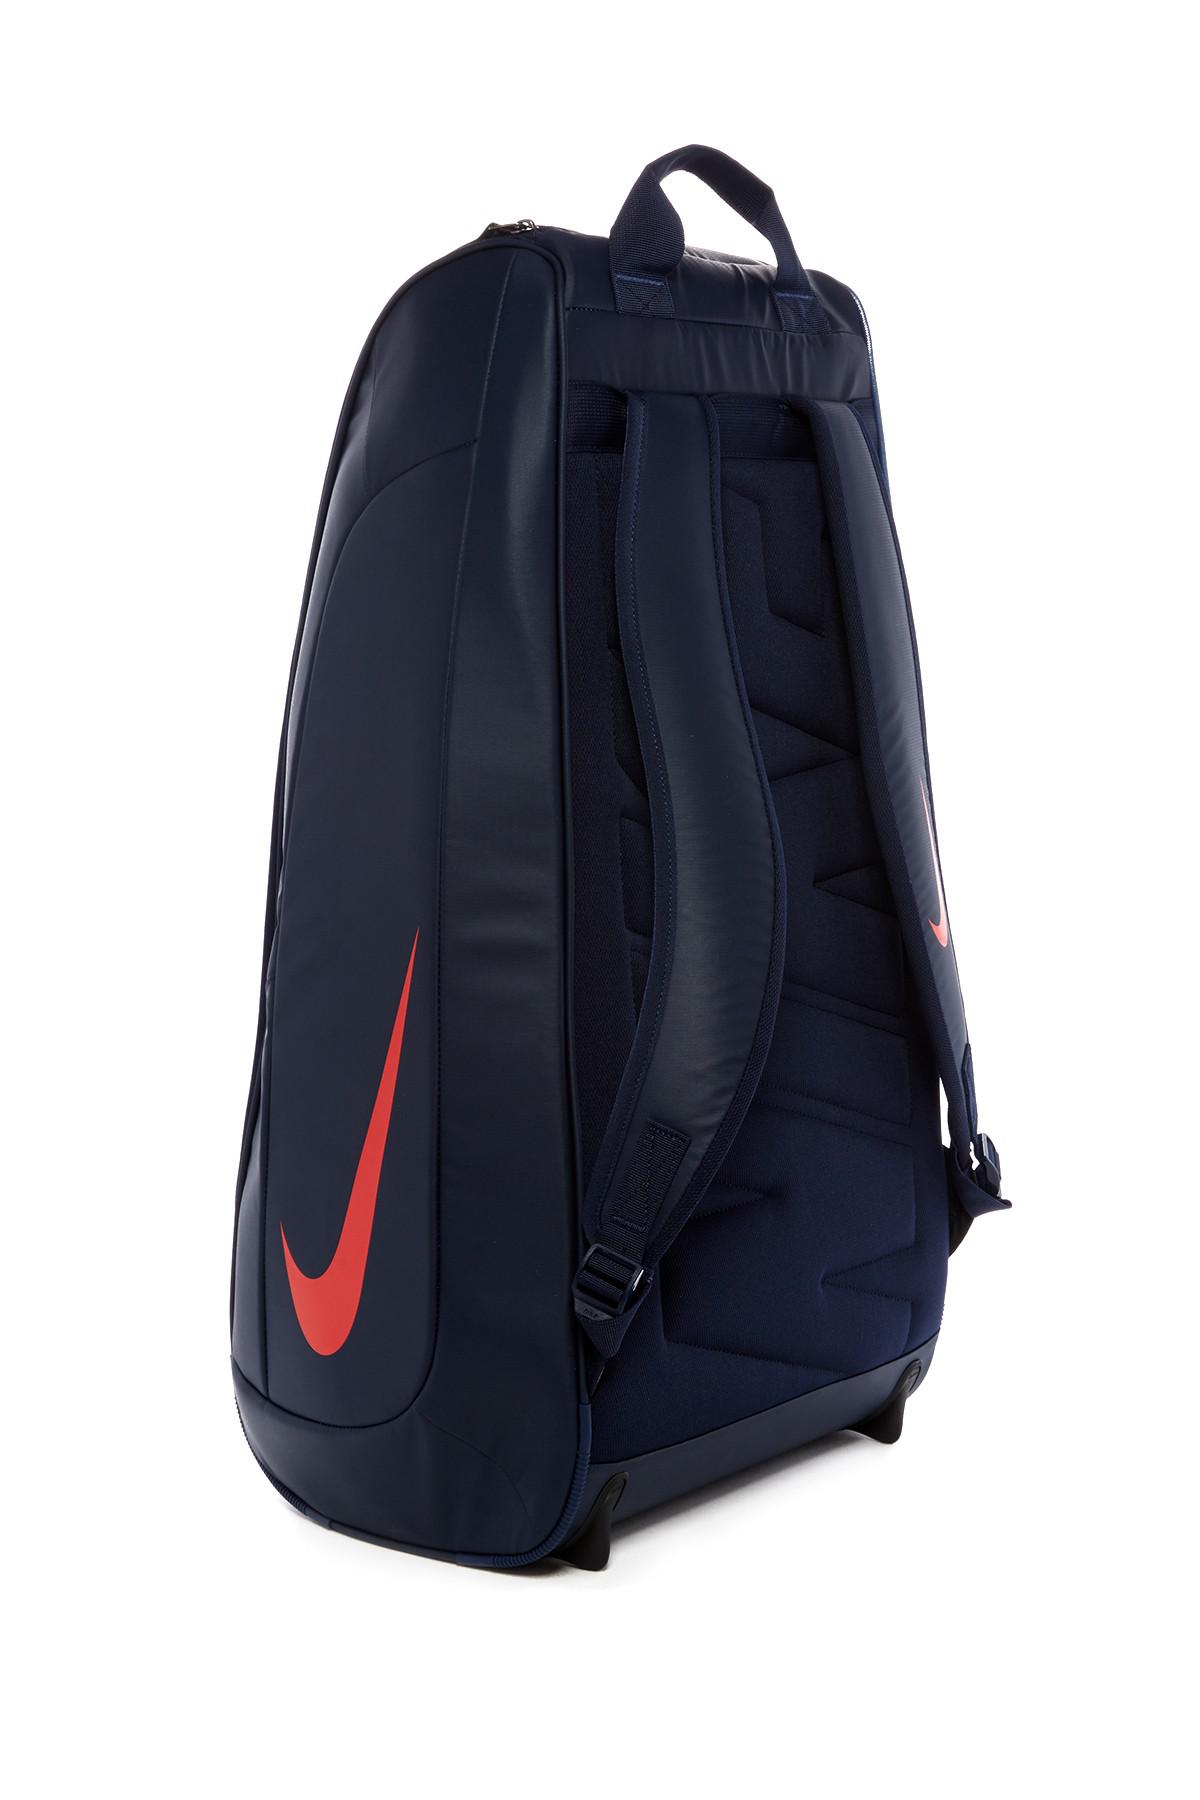 Nike Tennis Court Tech 1 Bag in Navy-Red (Blue) for Men - Lyst